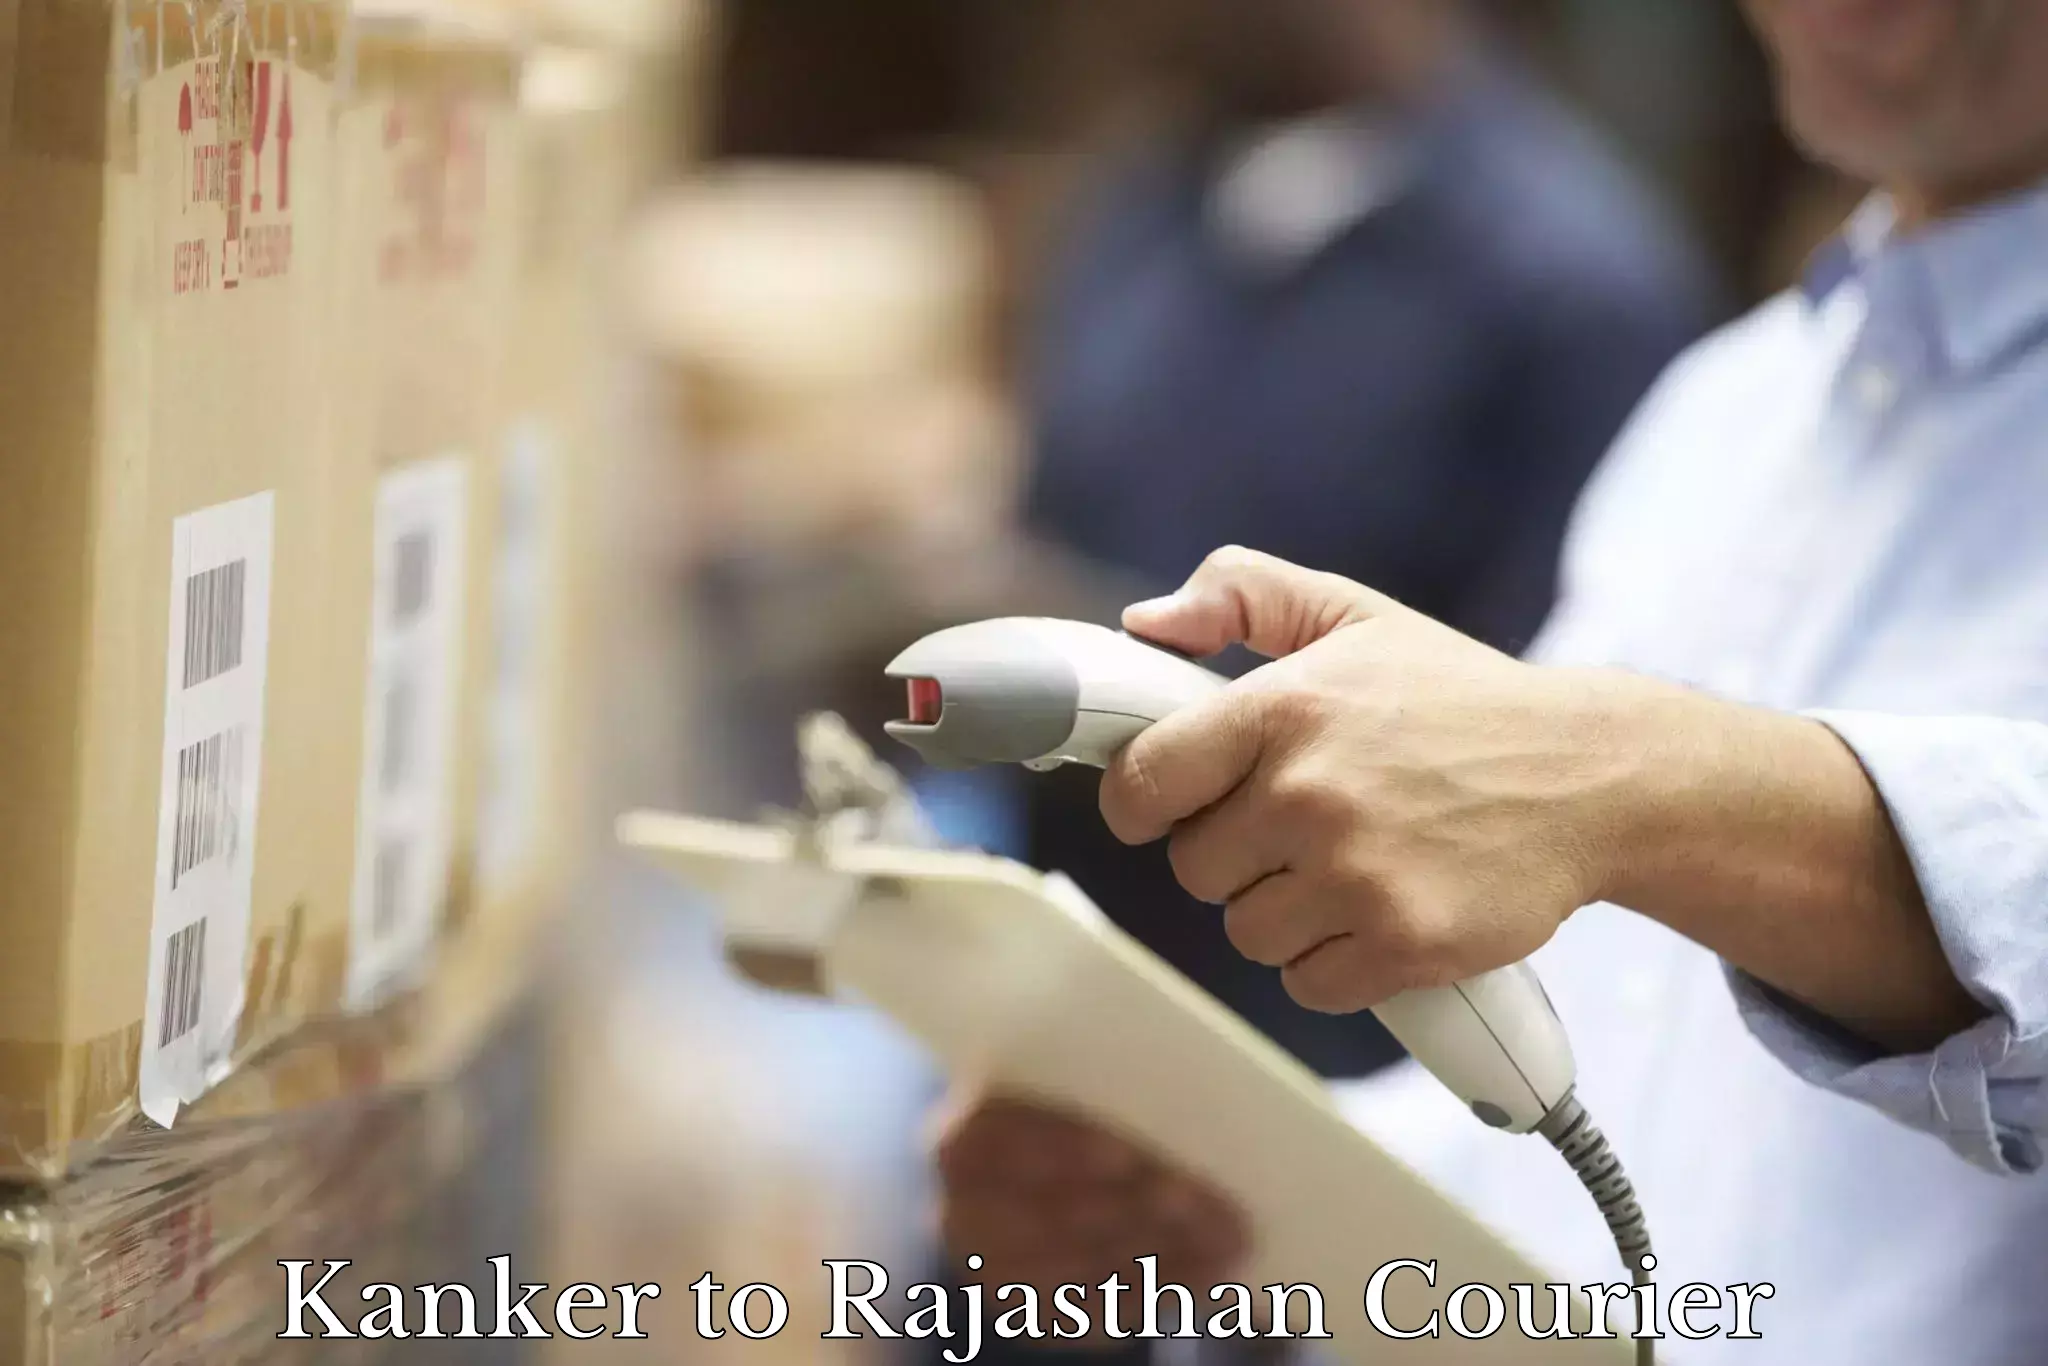 Express delivery capabilities Kanker to Rajgarh Rajasthan